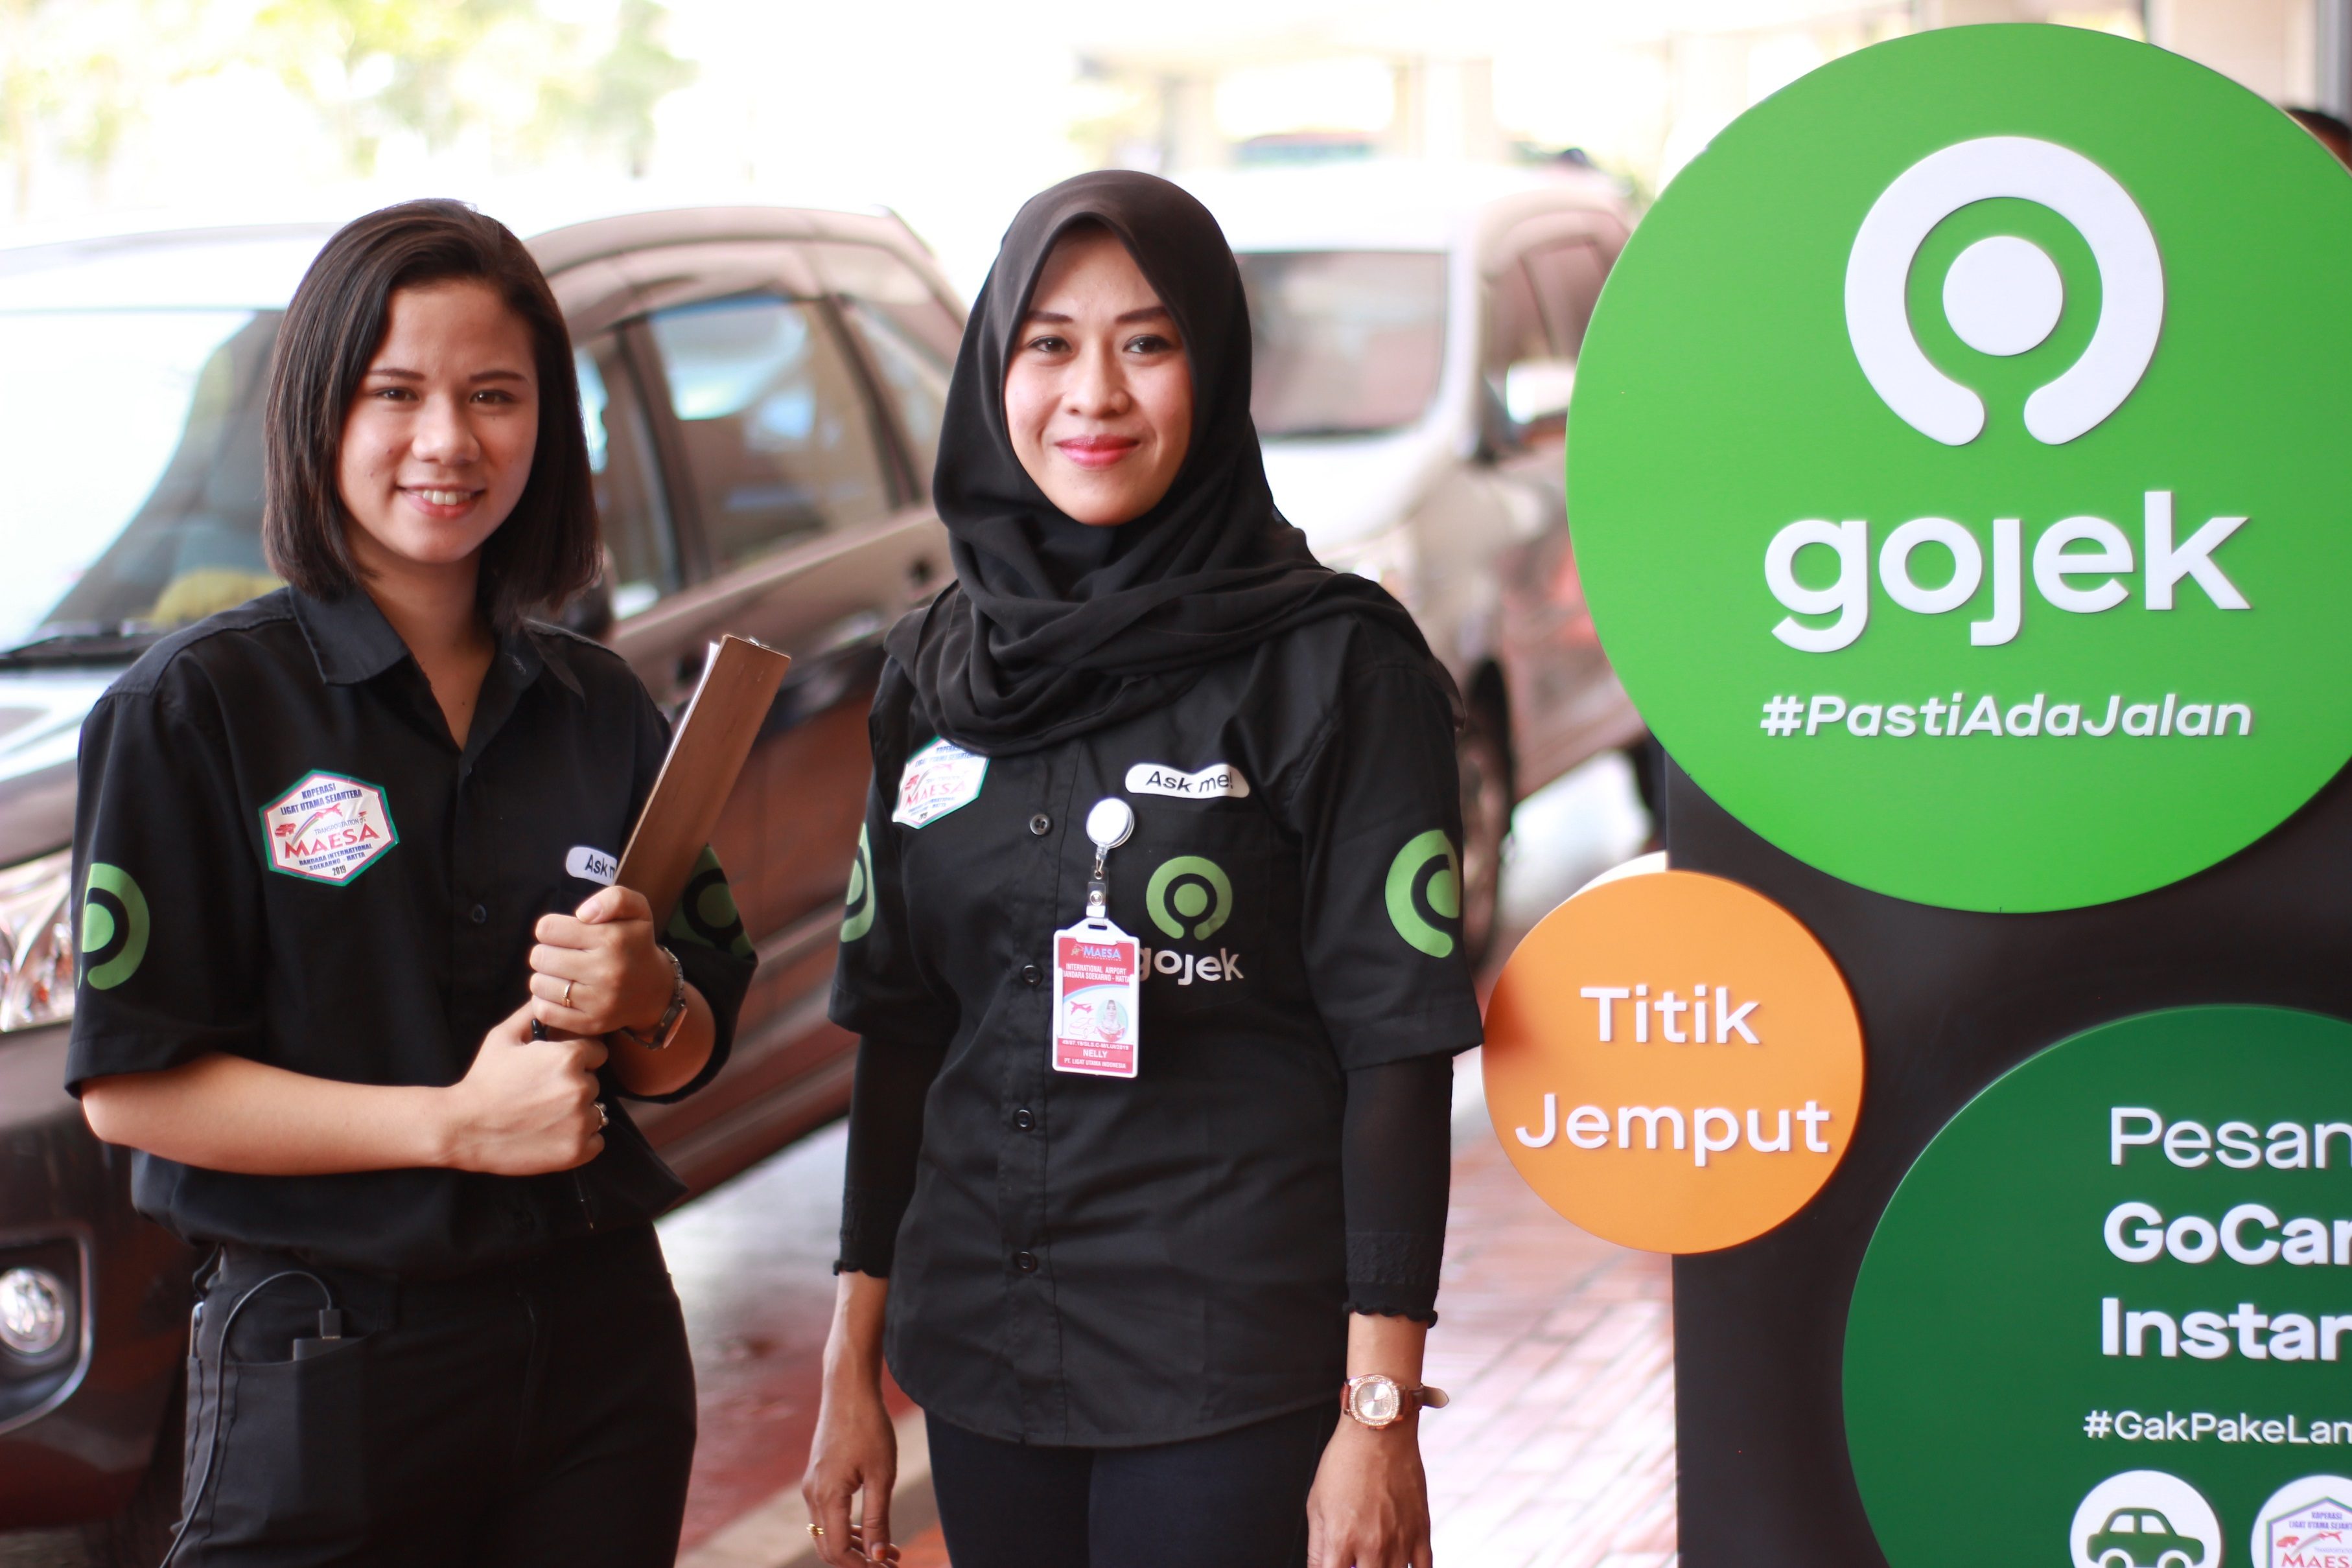 Indonesia Digest: Gojek launches GoCar Instant; Grab ties up with Sejasa